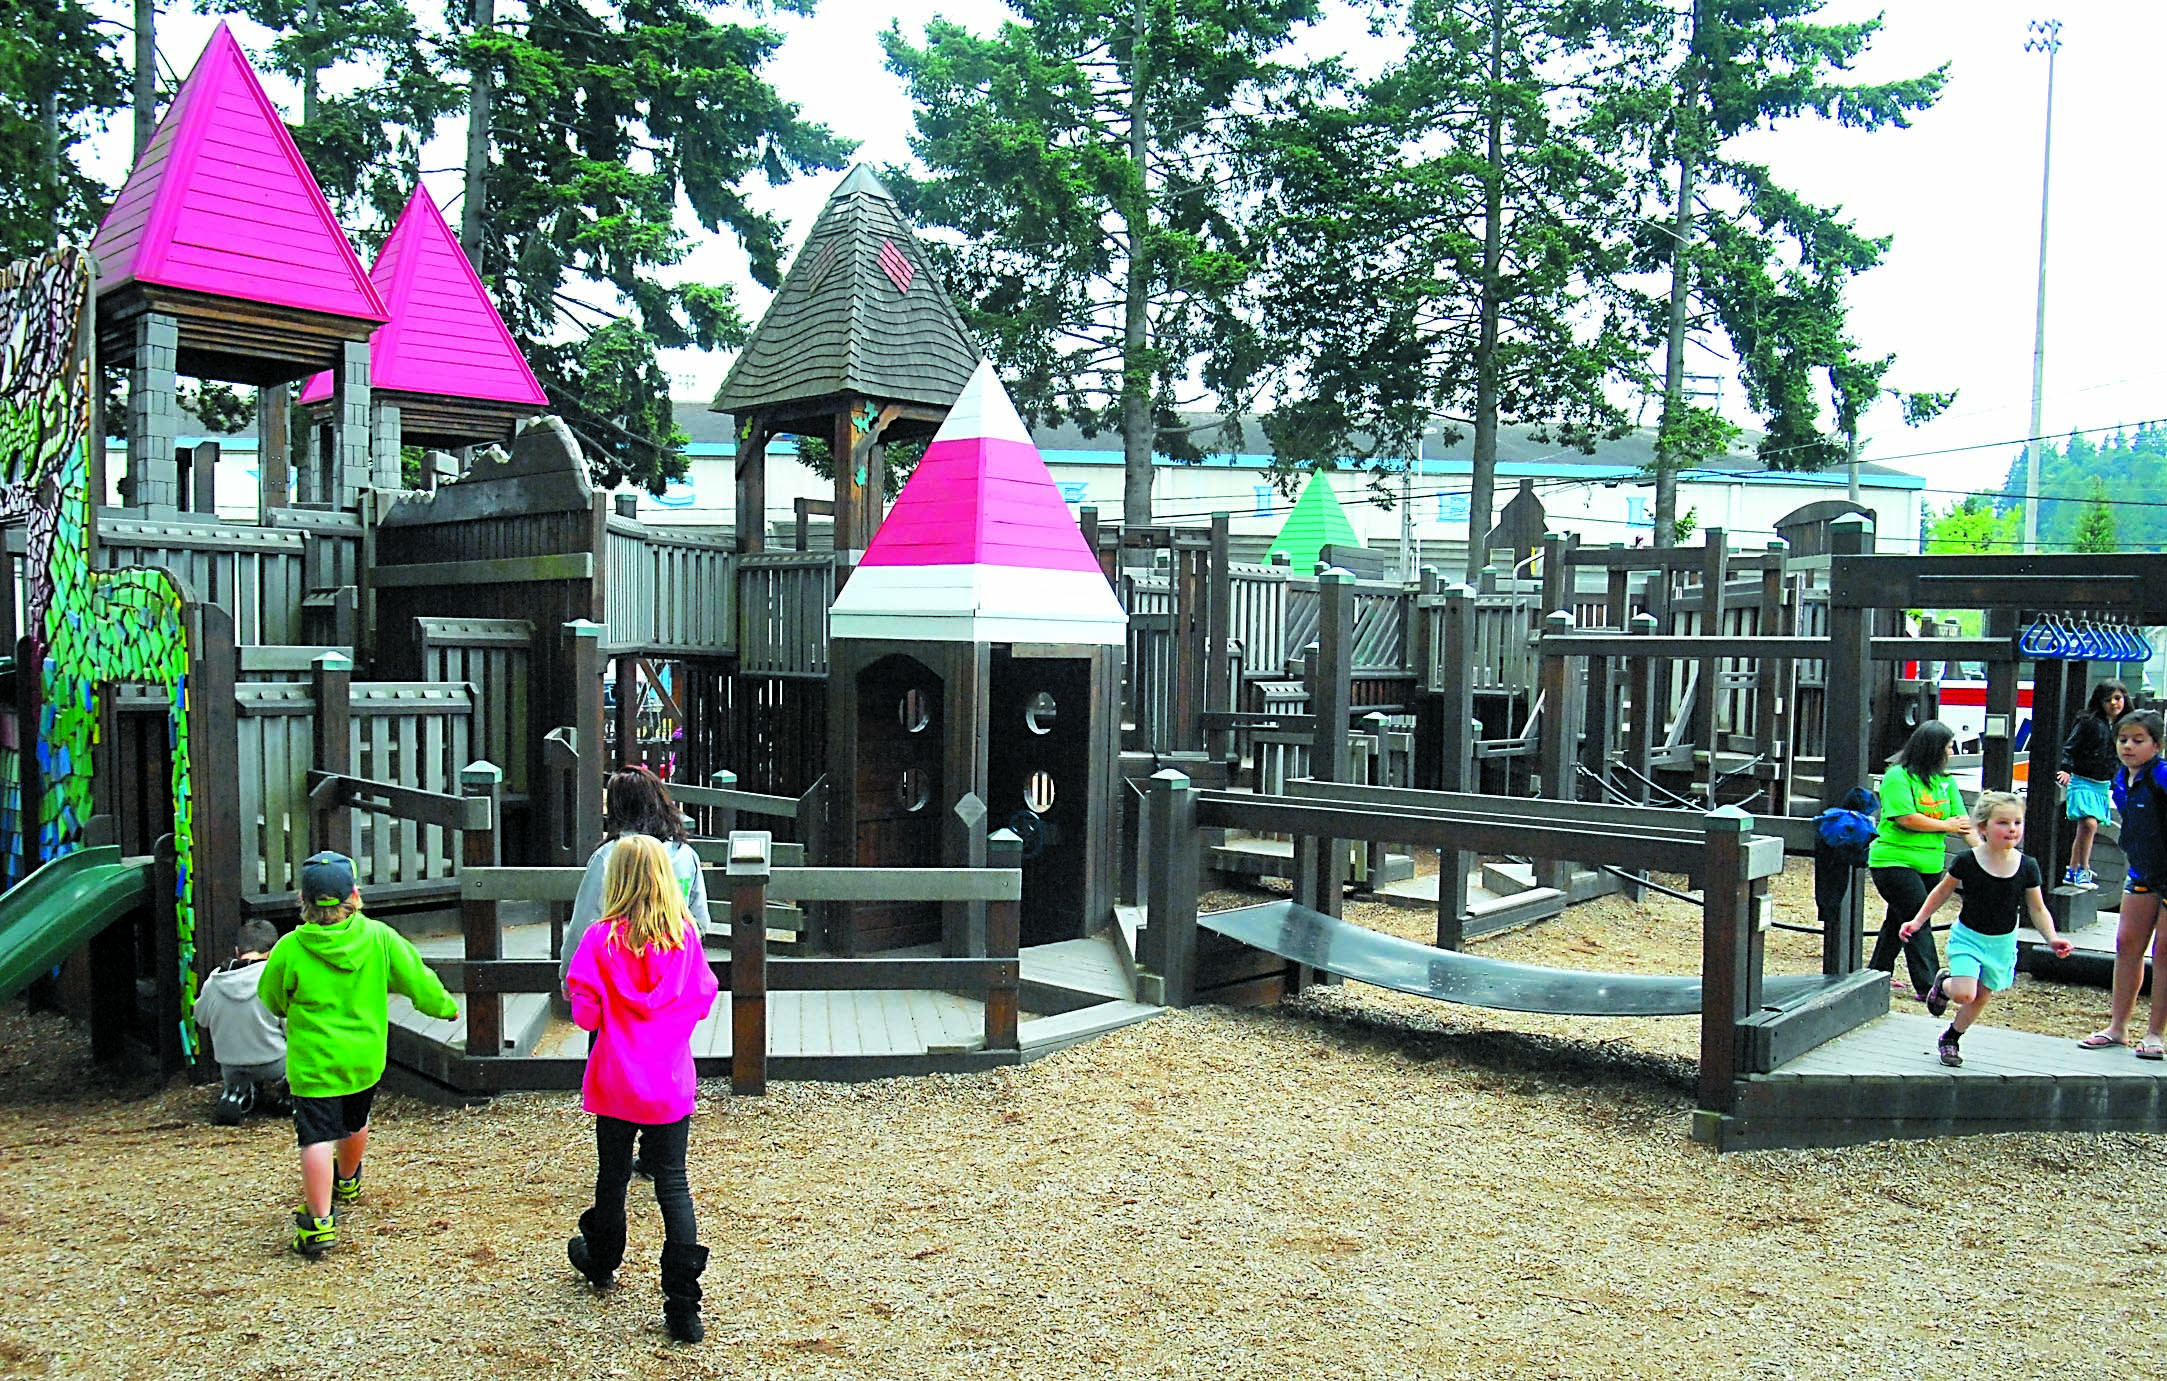 Children play at the Dream Playground at Erickson Playfield in Port Angeles on Tuesday. Keith Thorpe/Peninsula Daily News